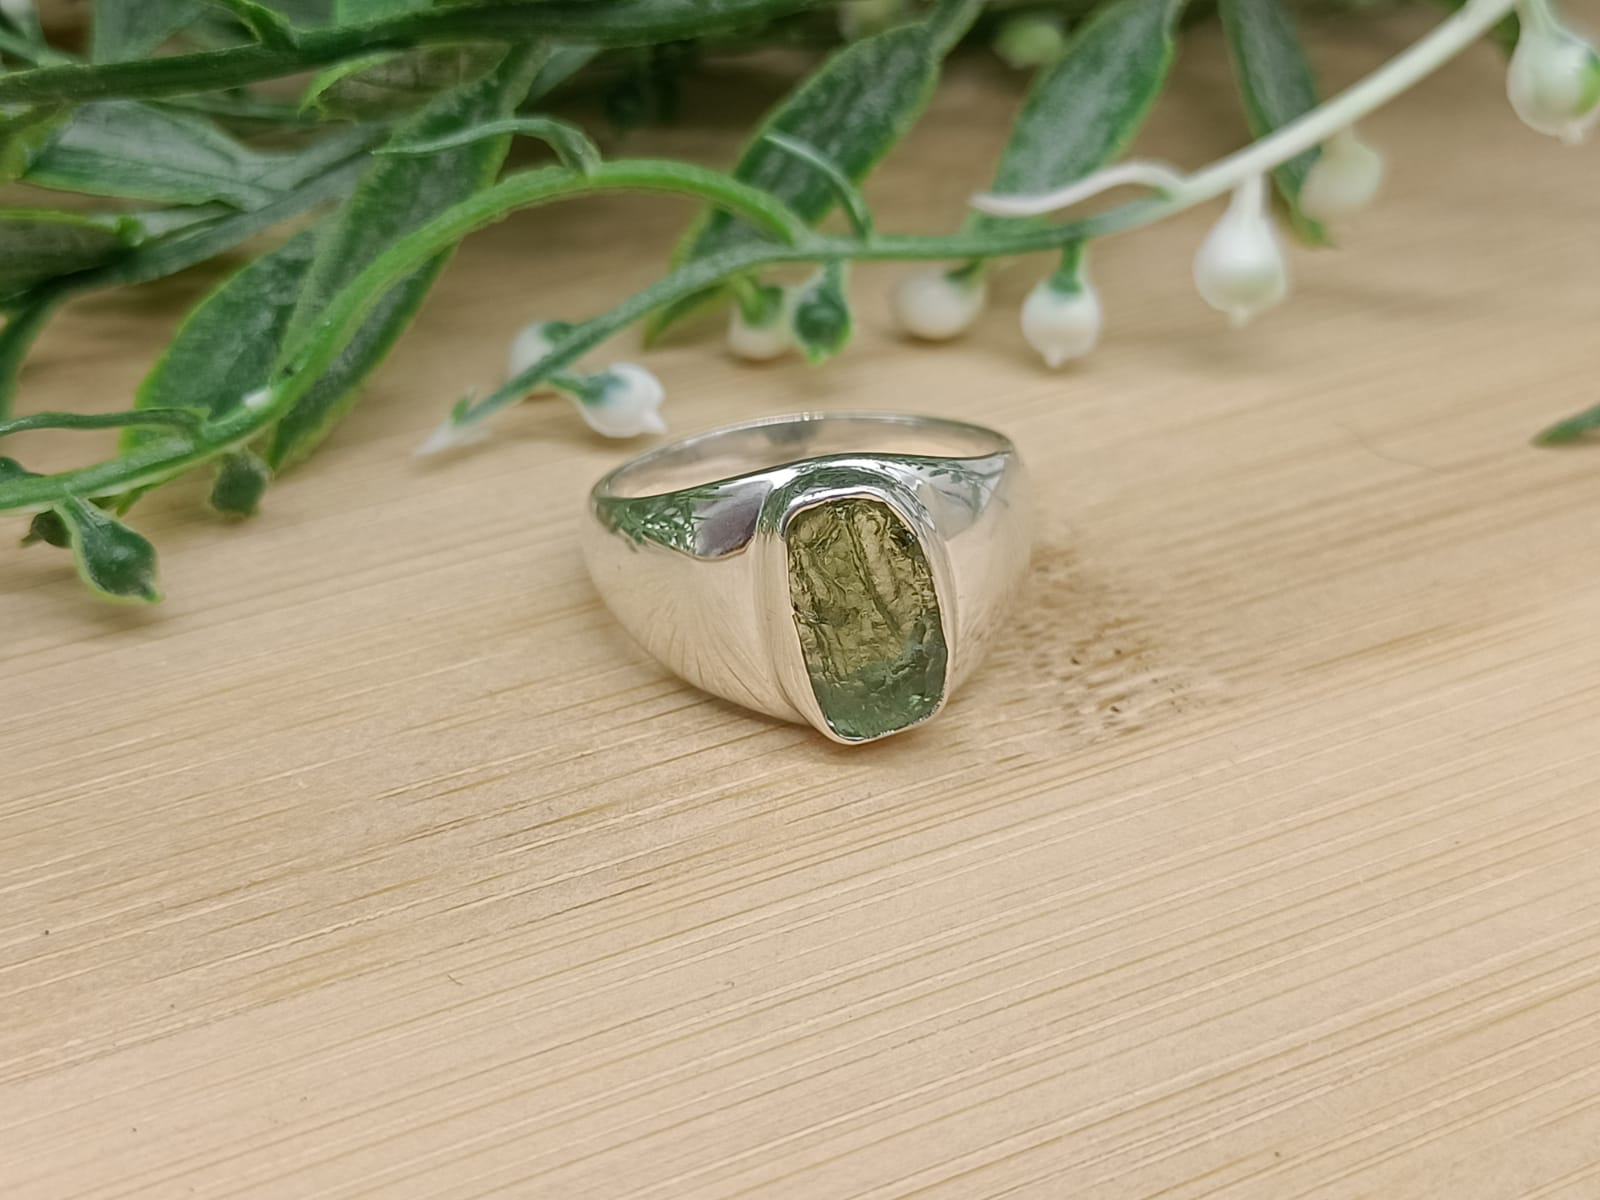 Authentic Moldavite Solid 925 Sterling Silver Ring Size 10 or T1/2 10x8mm Crystal Wellness